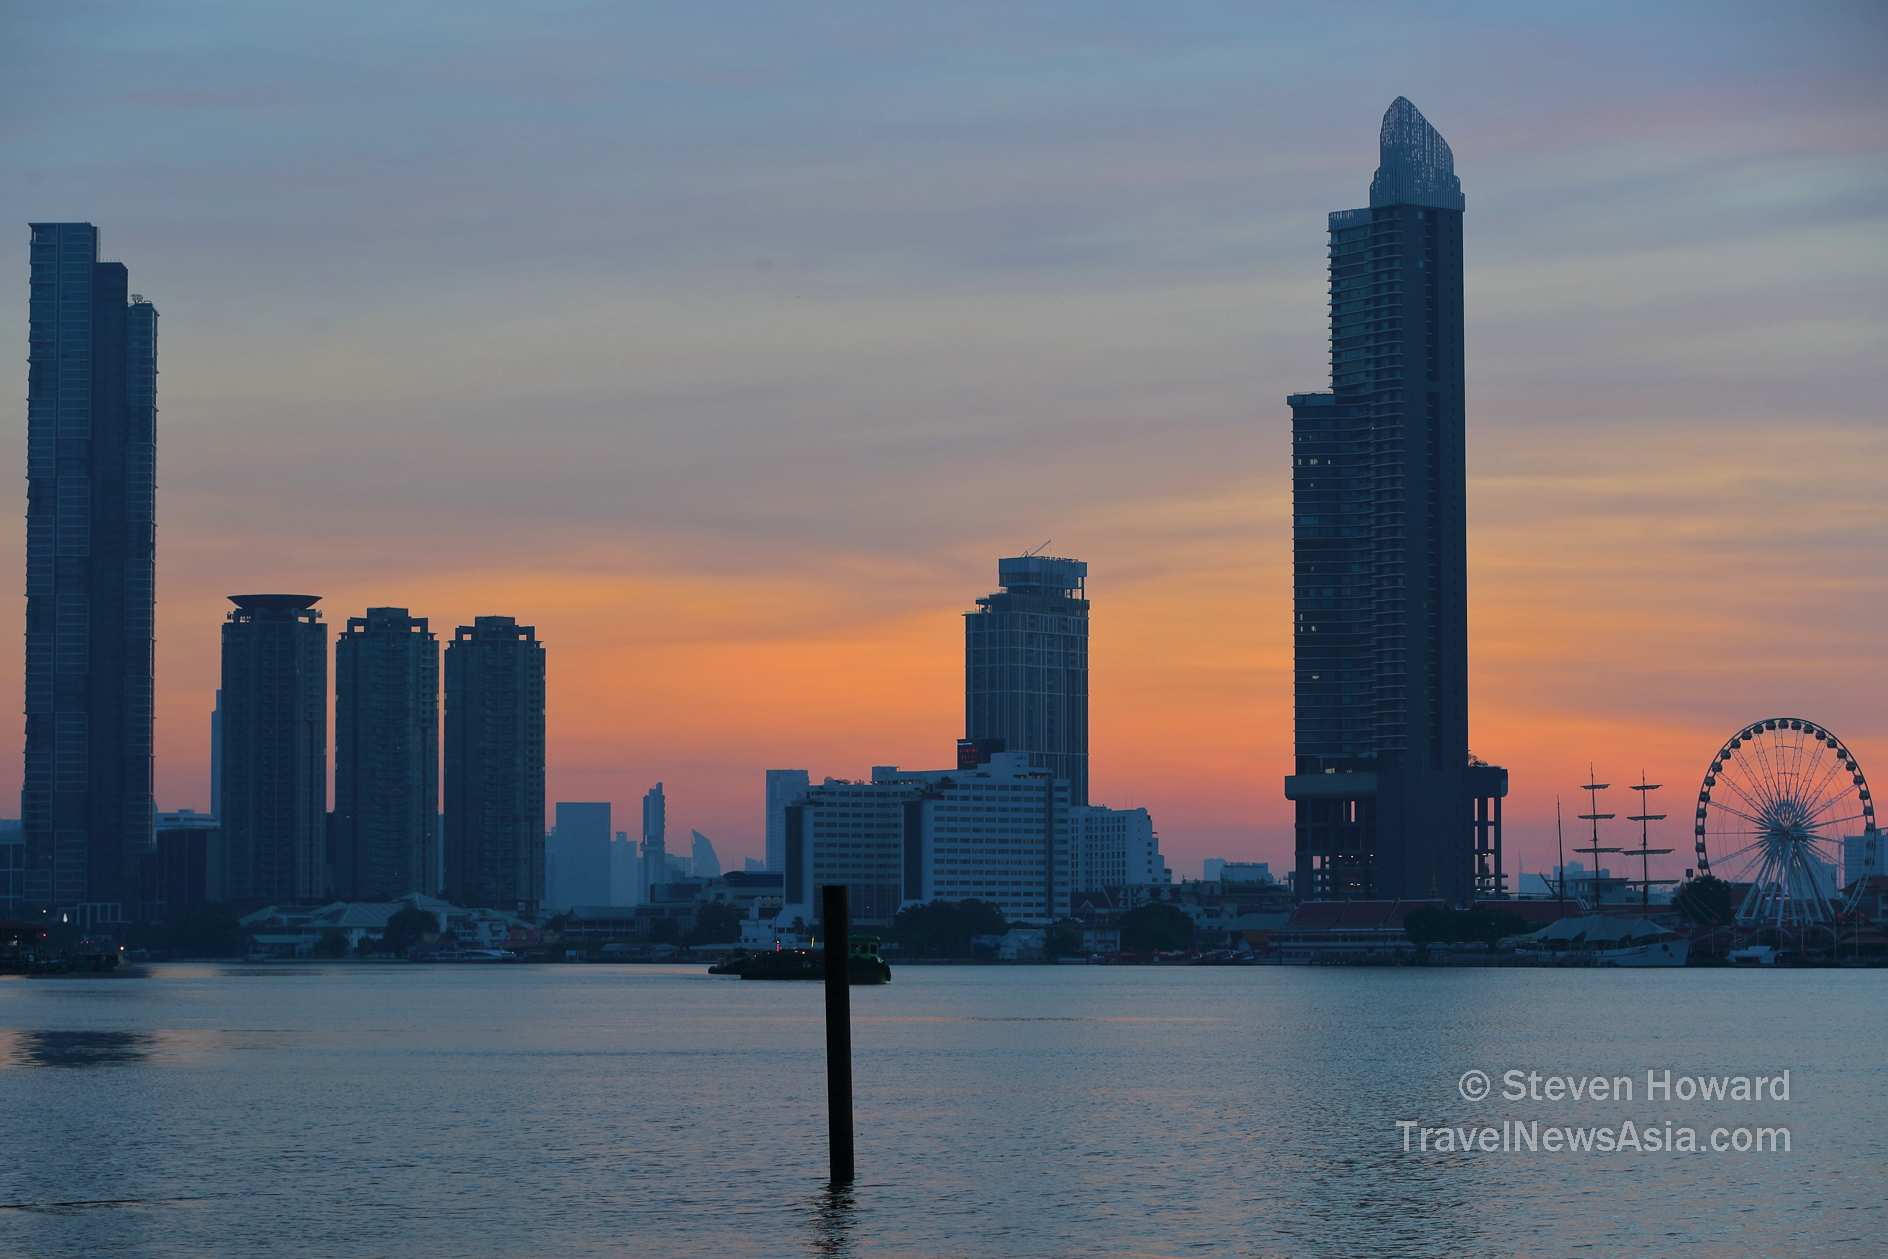 Sunrise in Bangkok, Thailand. Picture by Steven Howard of TravelNewsAsia.com Click to enlarge.